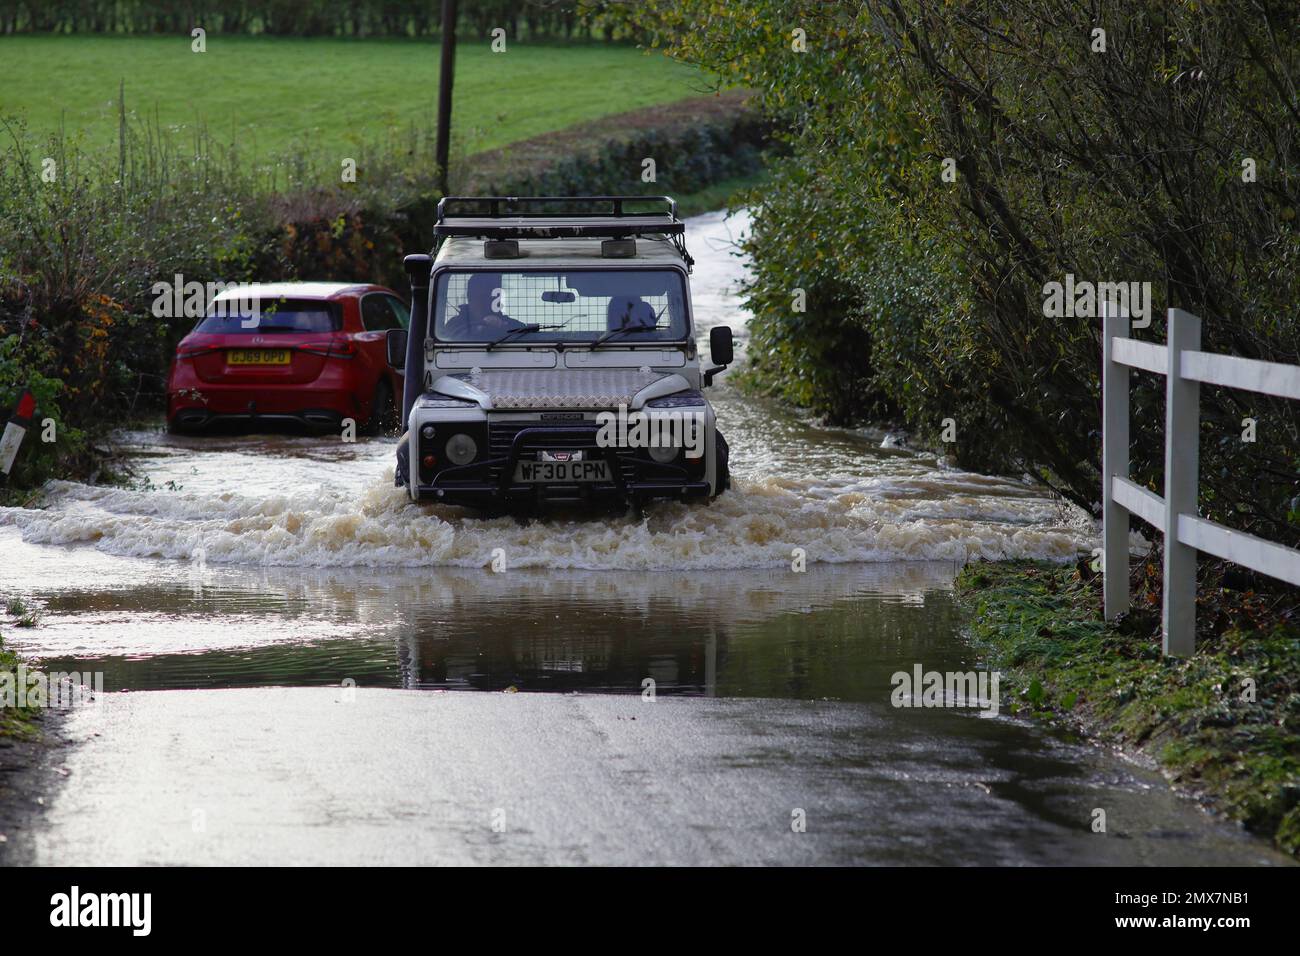 Land Rover Defender 110 passing through water from a swollen stream - tributary of the River Uck - which has flooded the England, East Sussex, lane between Buxted and Uckfield. Stranded Mercedes car in the background that had broken down in the flood water. Wealden Way crosses the road at this point. Stock Photo